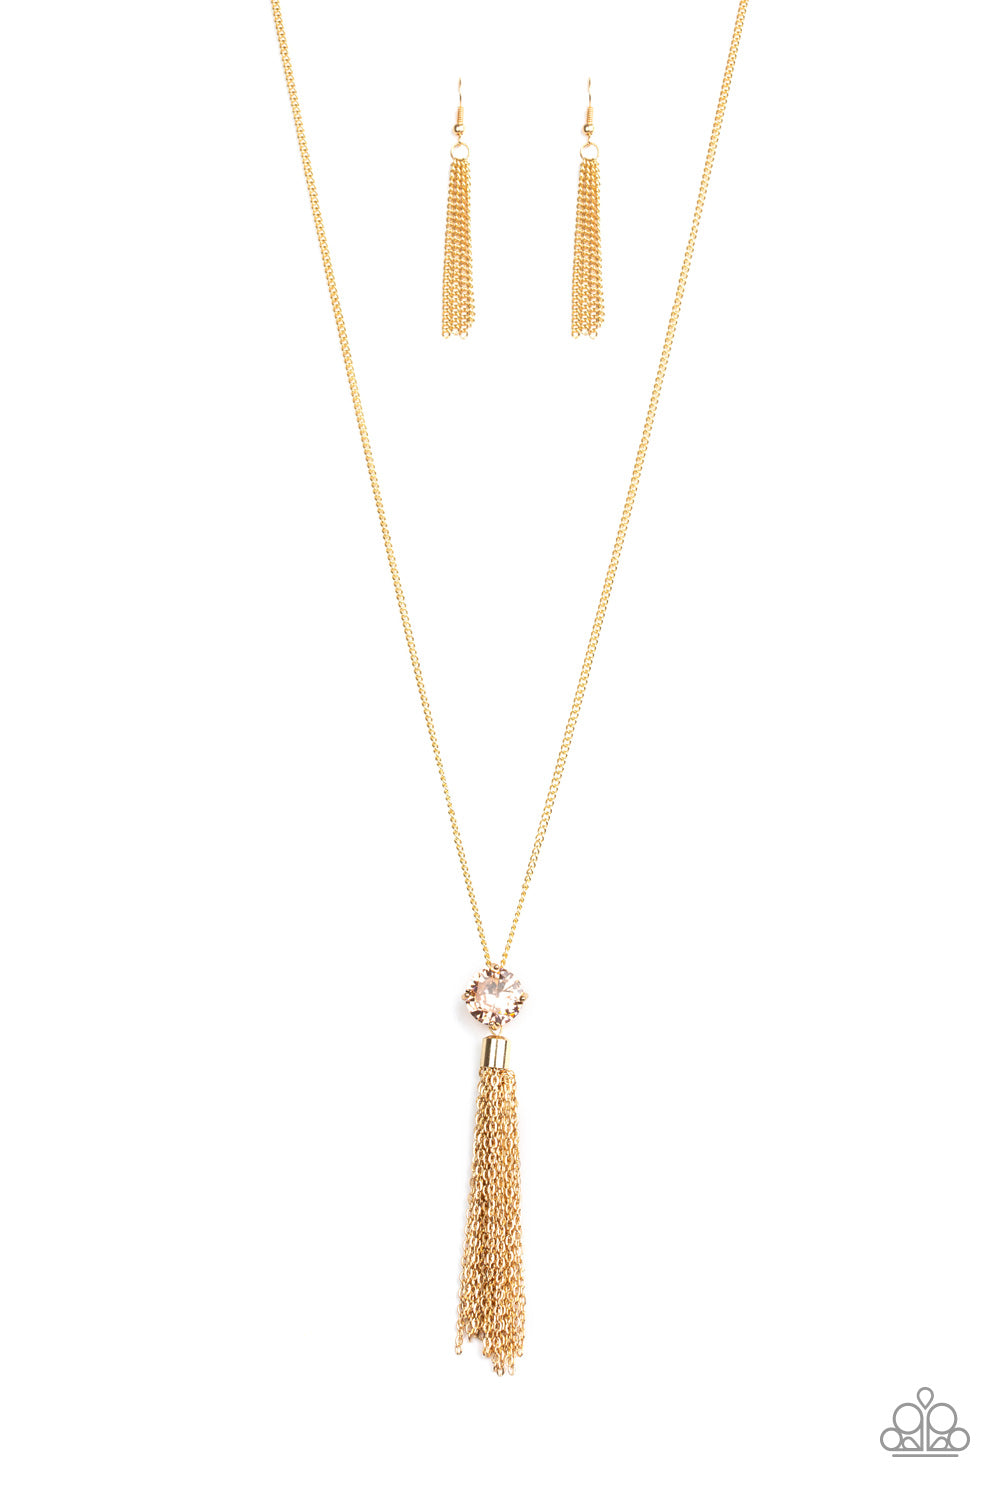 five-dollar-jewelry-gold-necklace-16-187-paparazzi-accessories